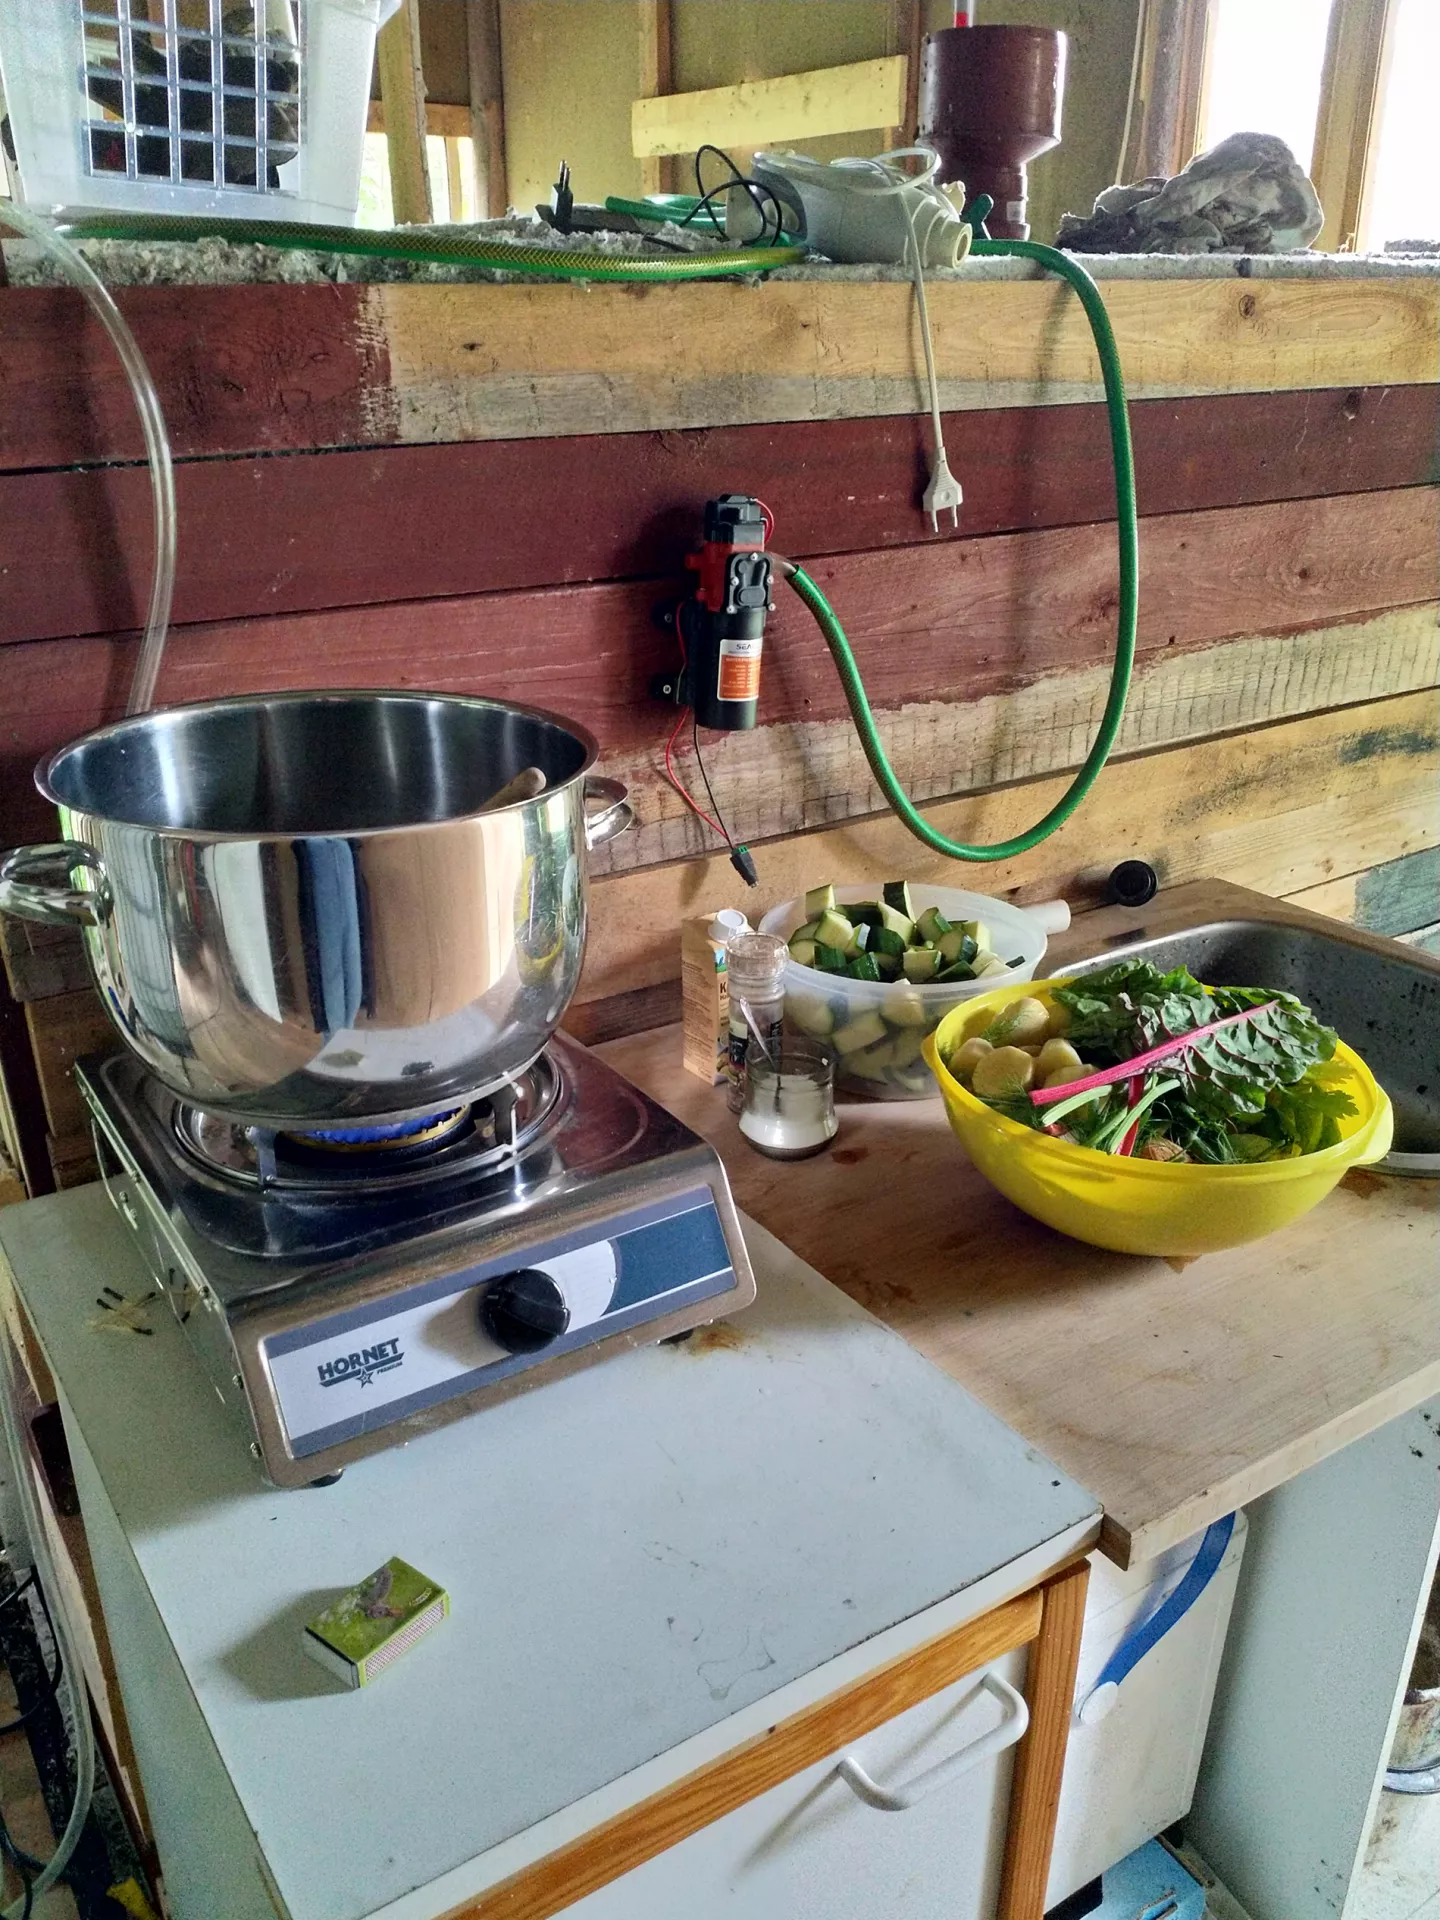 food from the garden cooked on biogas